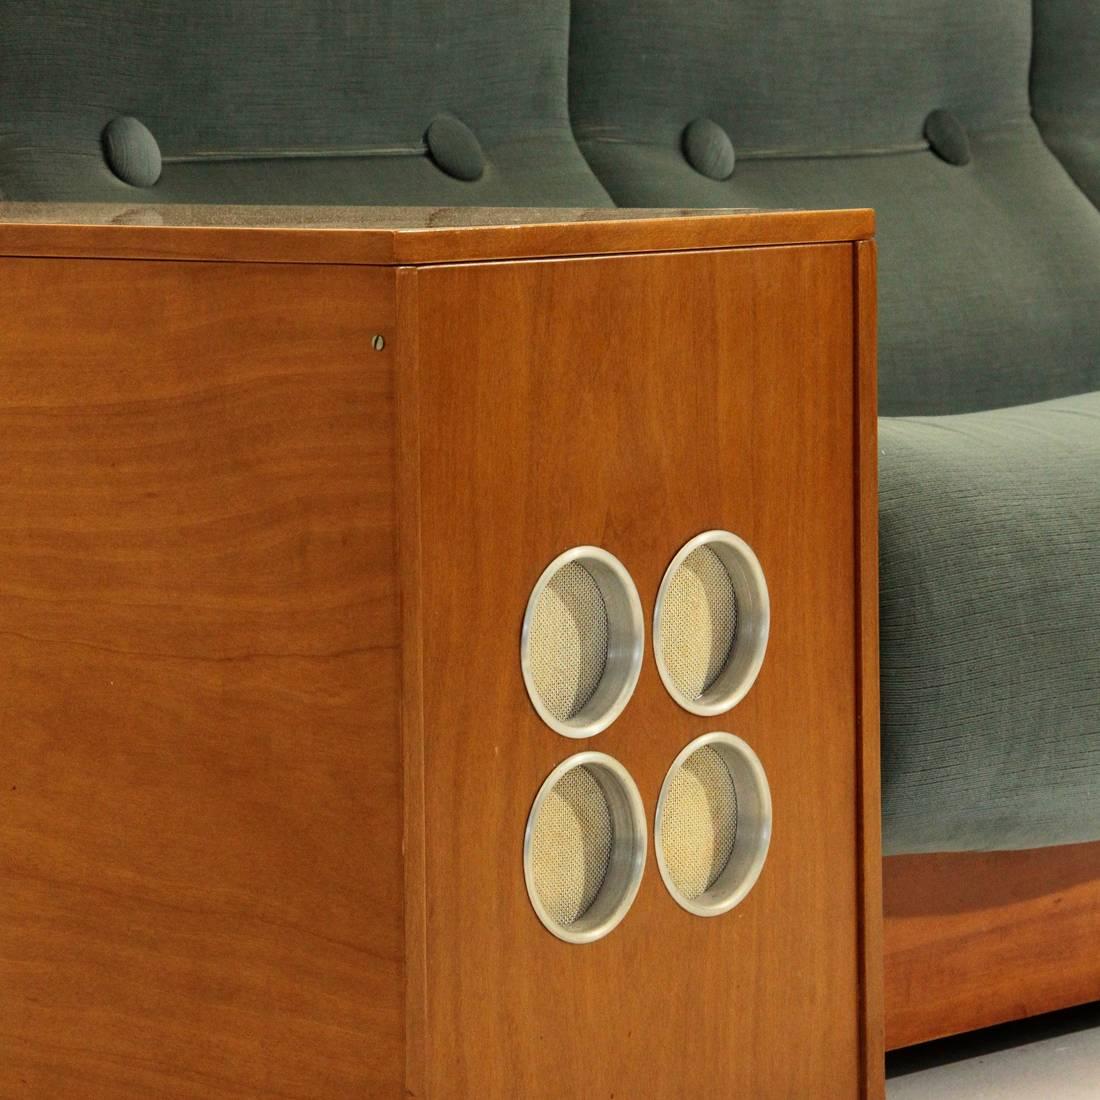 Late 20th Century Italian Mid-Century Modular Sofa with Bar Cabinet and Turntable Player Integrate